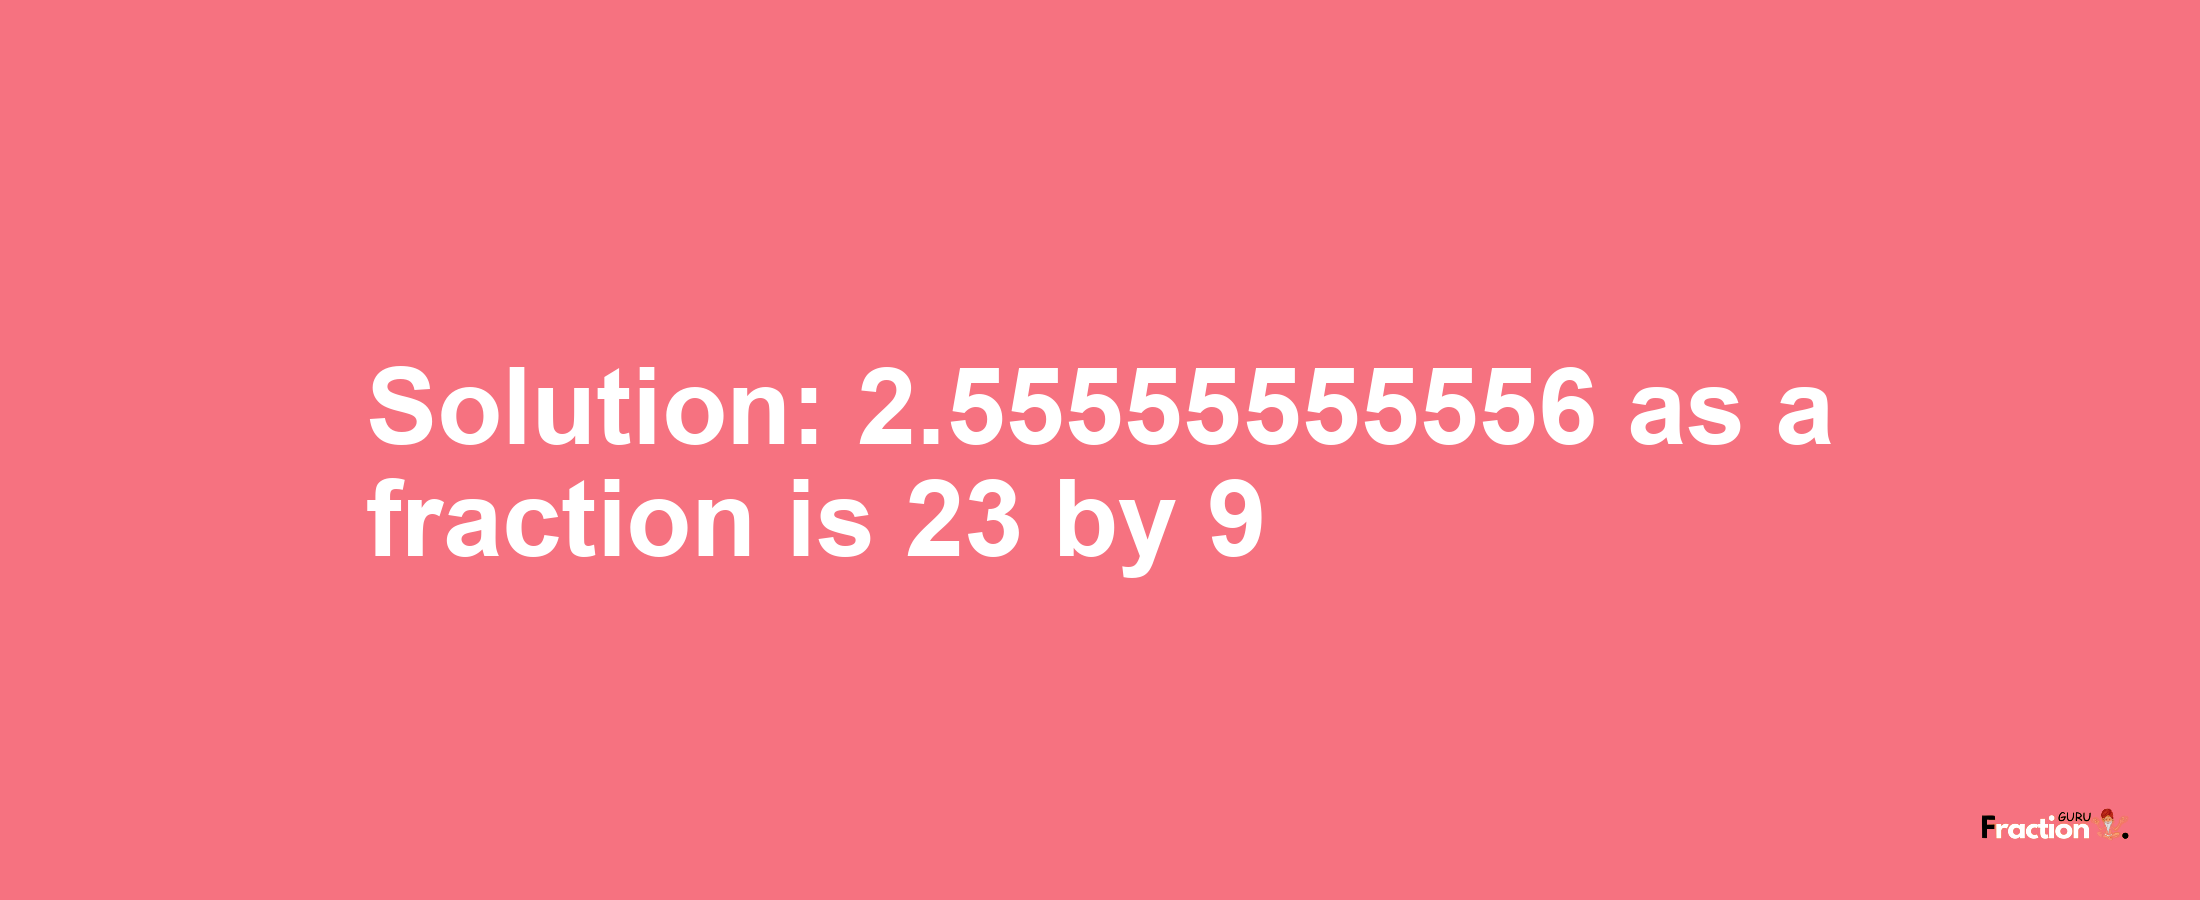 Solution:2.55555555556 as a fraction is 23/9